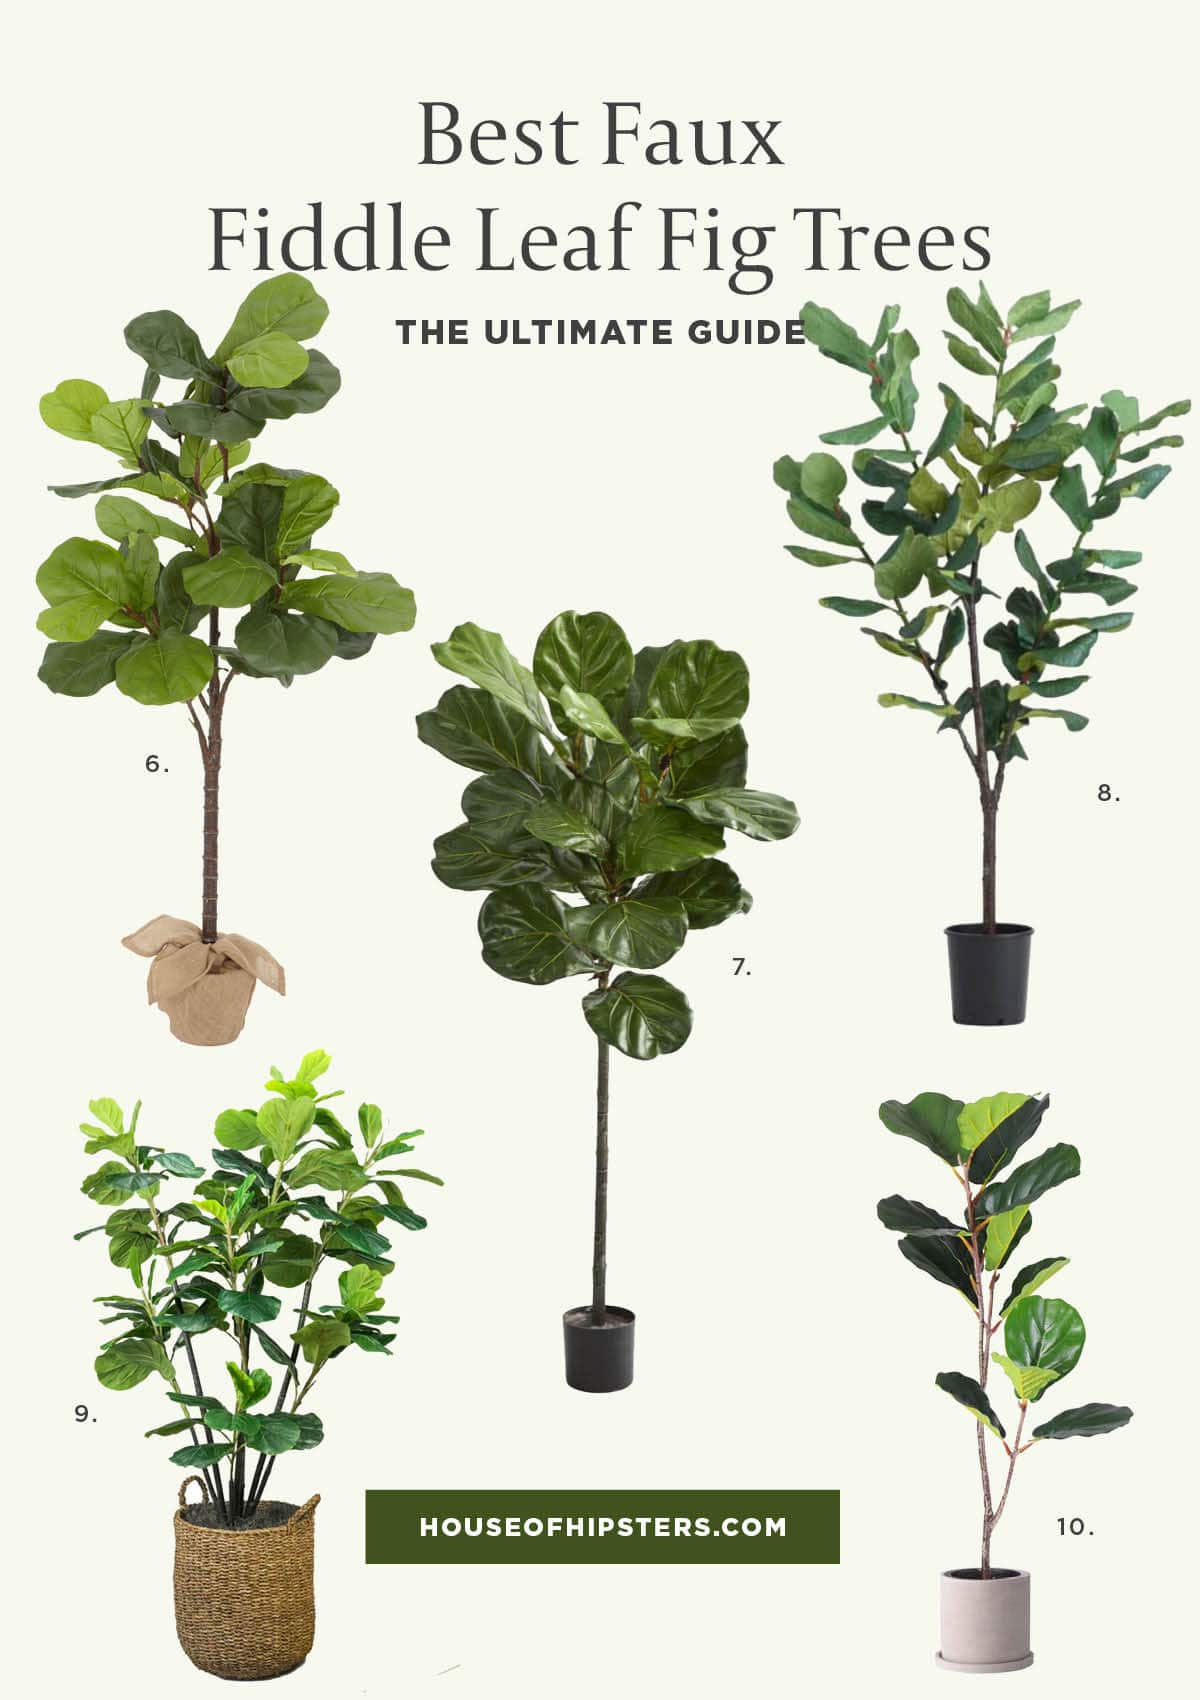 15 Best Faux Fiddle Leaf Fig Trees 